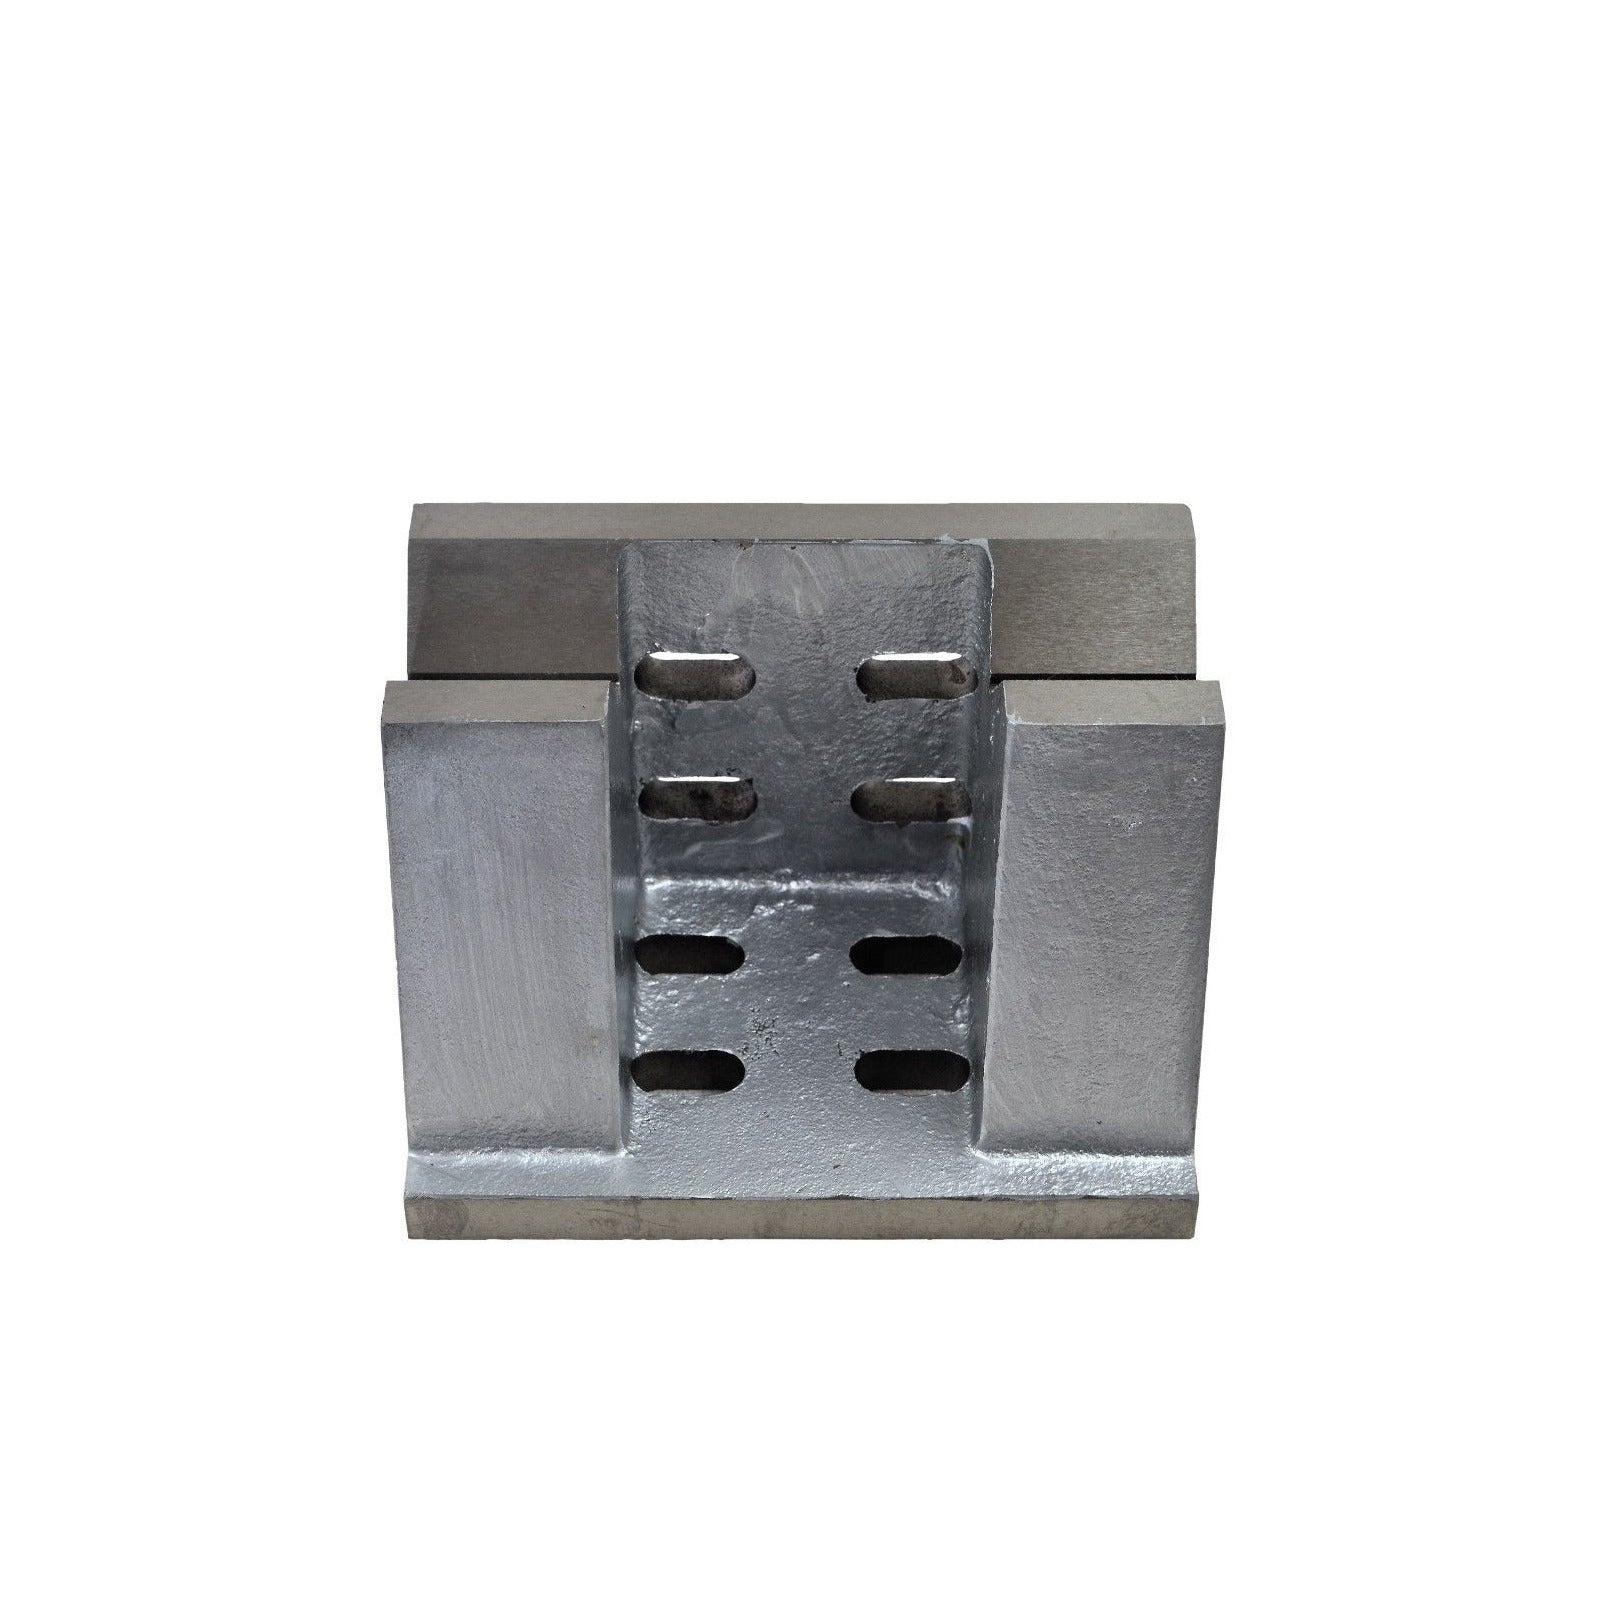 Angle Plate 4"x4"x6" - Slotted and Webbed Cast iron stress relieved